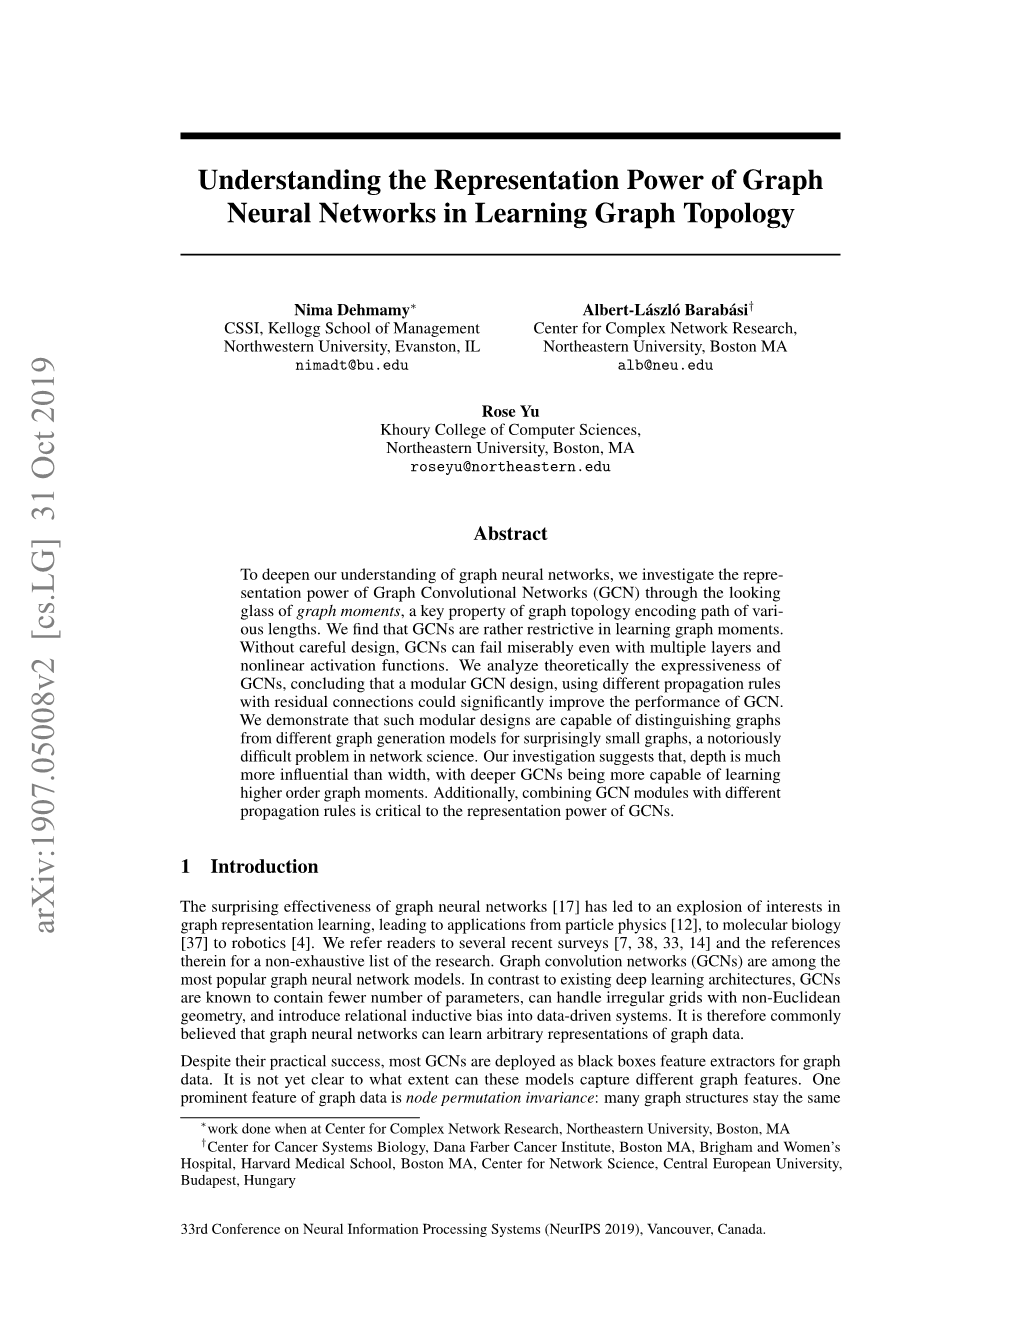 Understanding the Representation Power of Graph Neural Networks in Learning Graph Topology